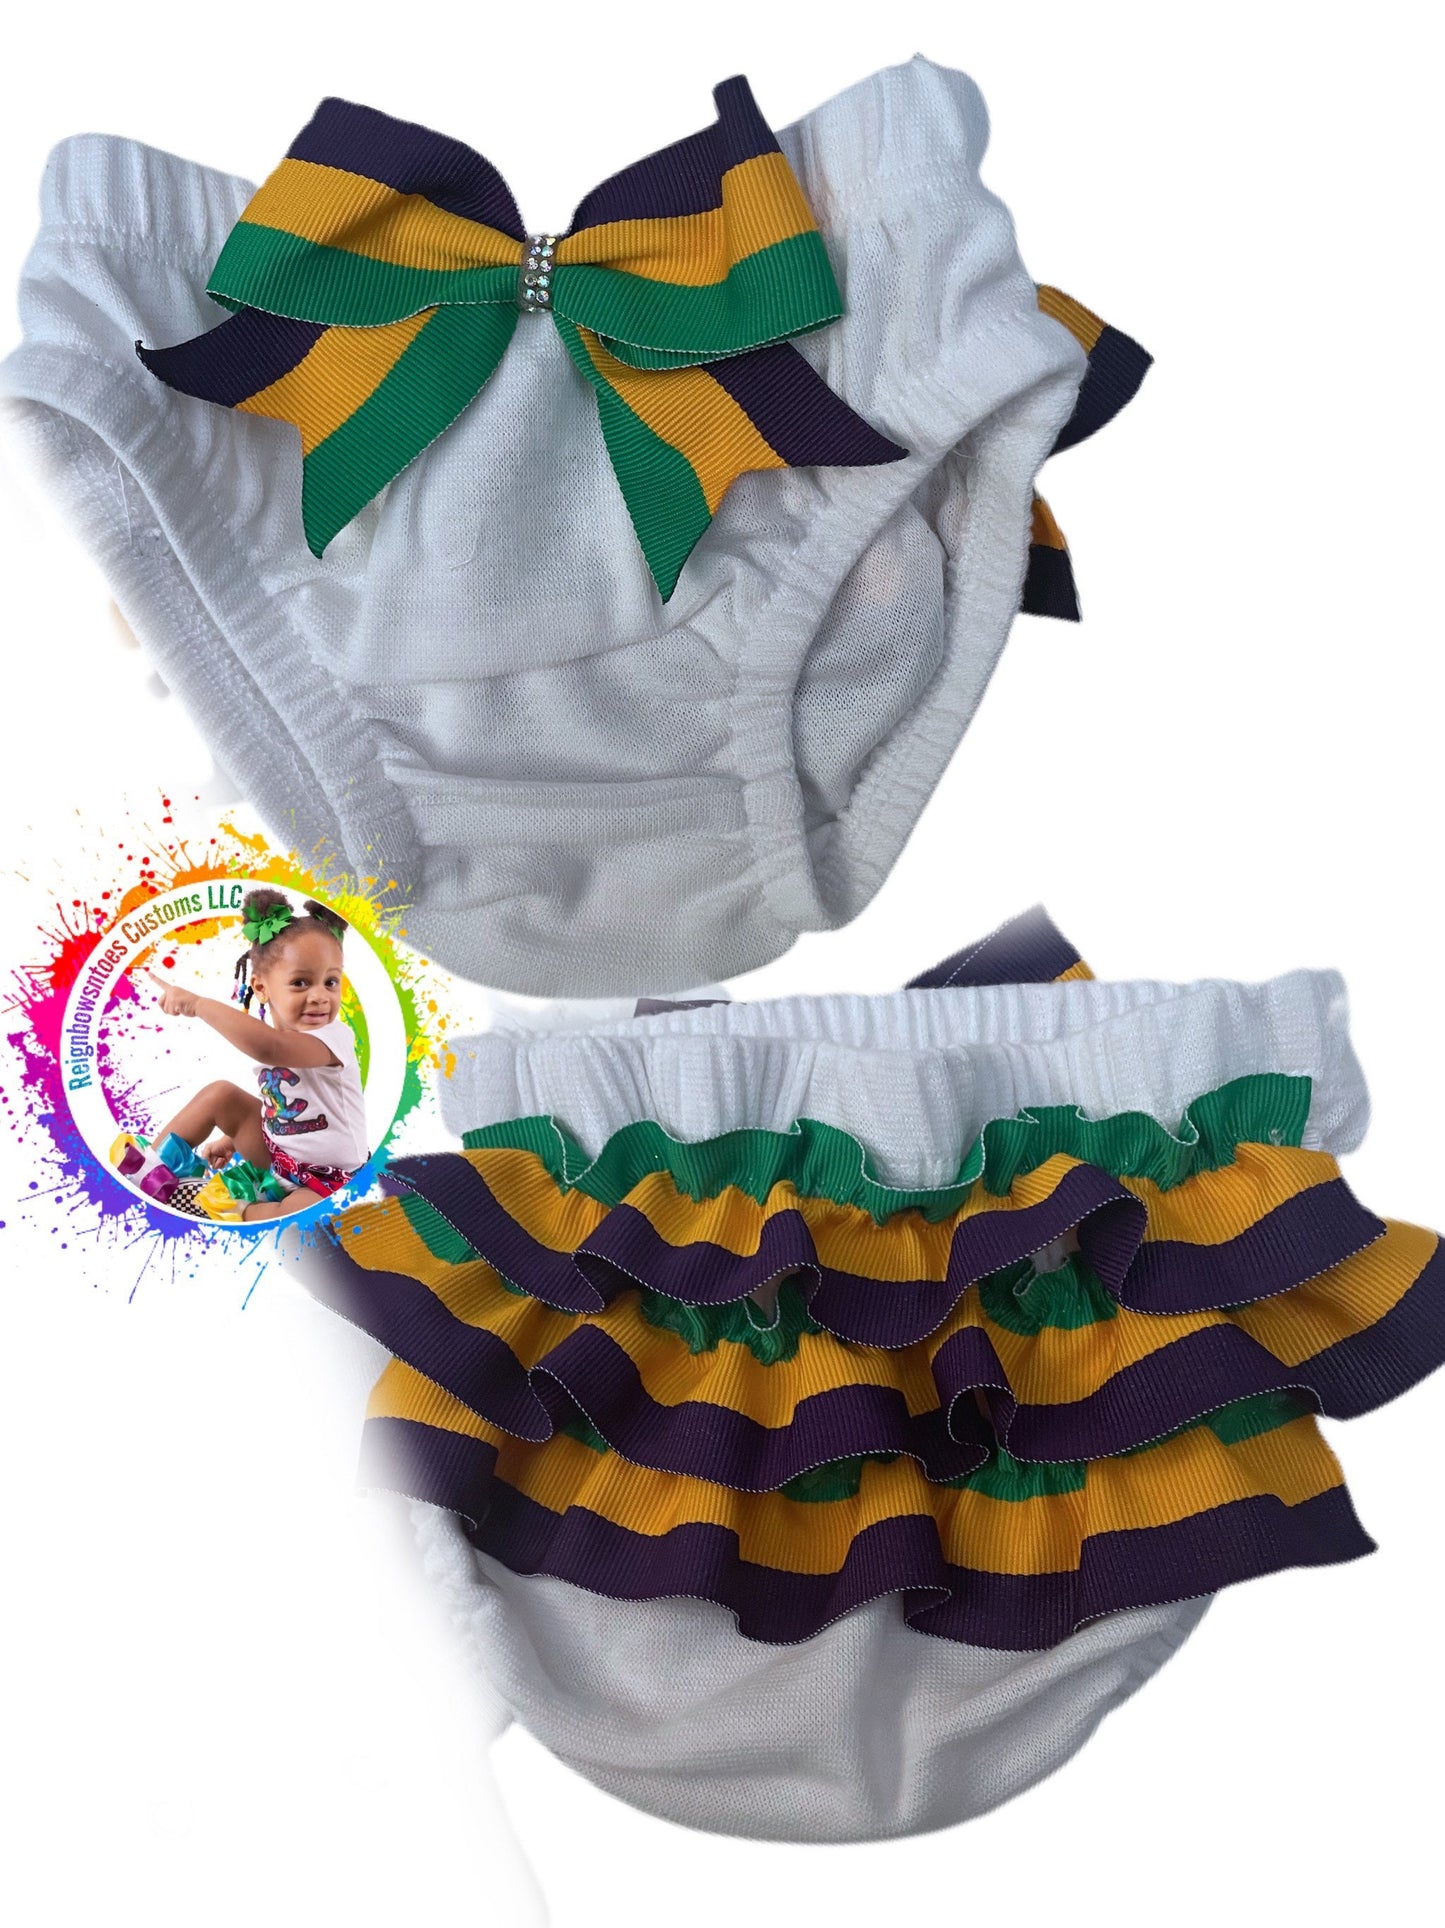 Custom ruffle butts|custom diaper covers| baby girl diaper cover - ReignBowsNtoes